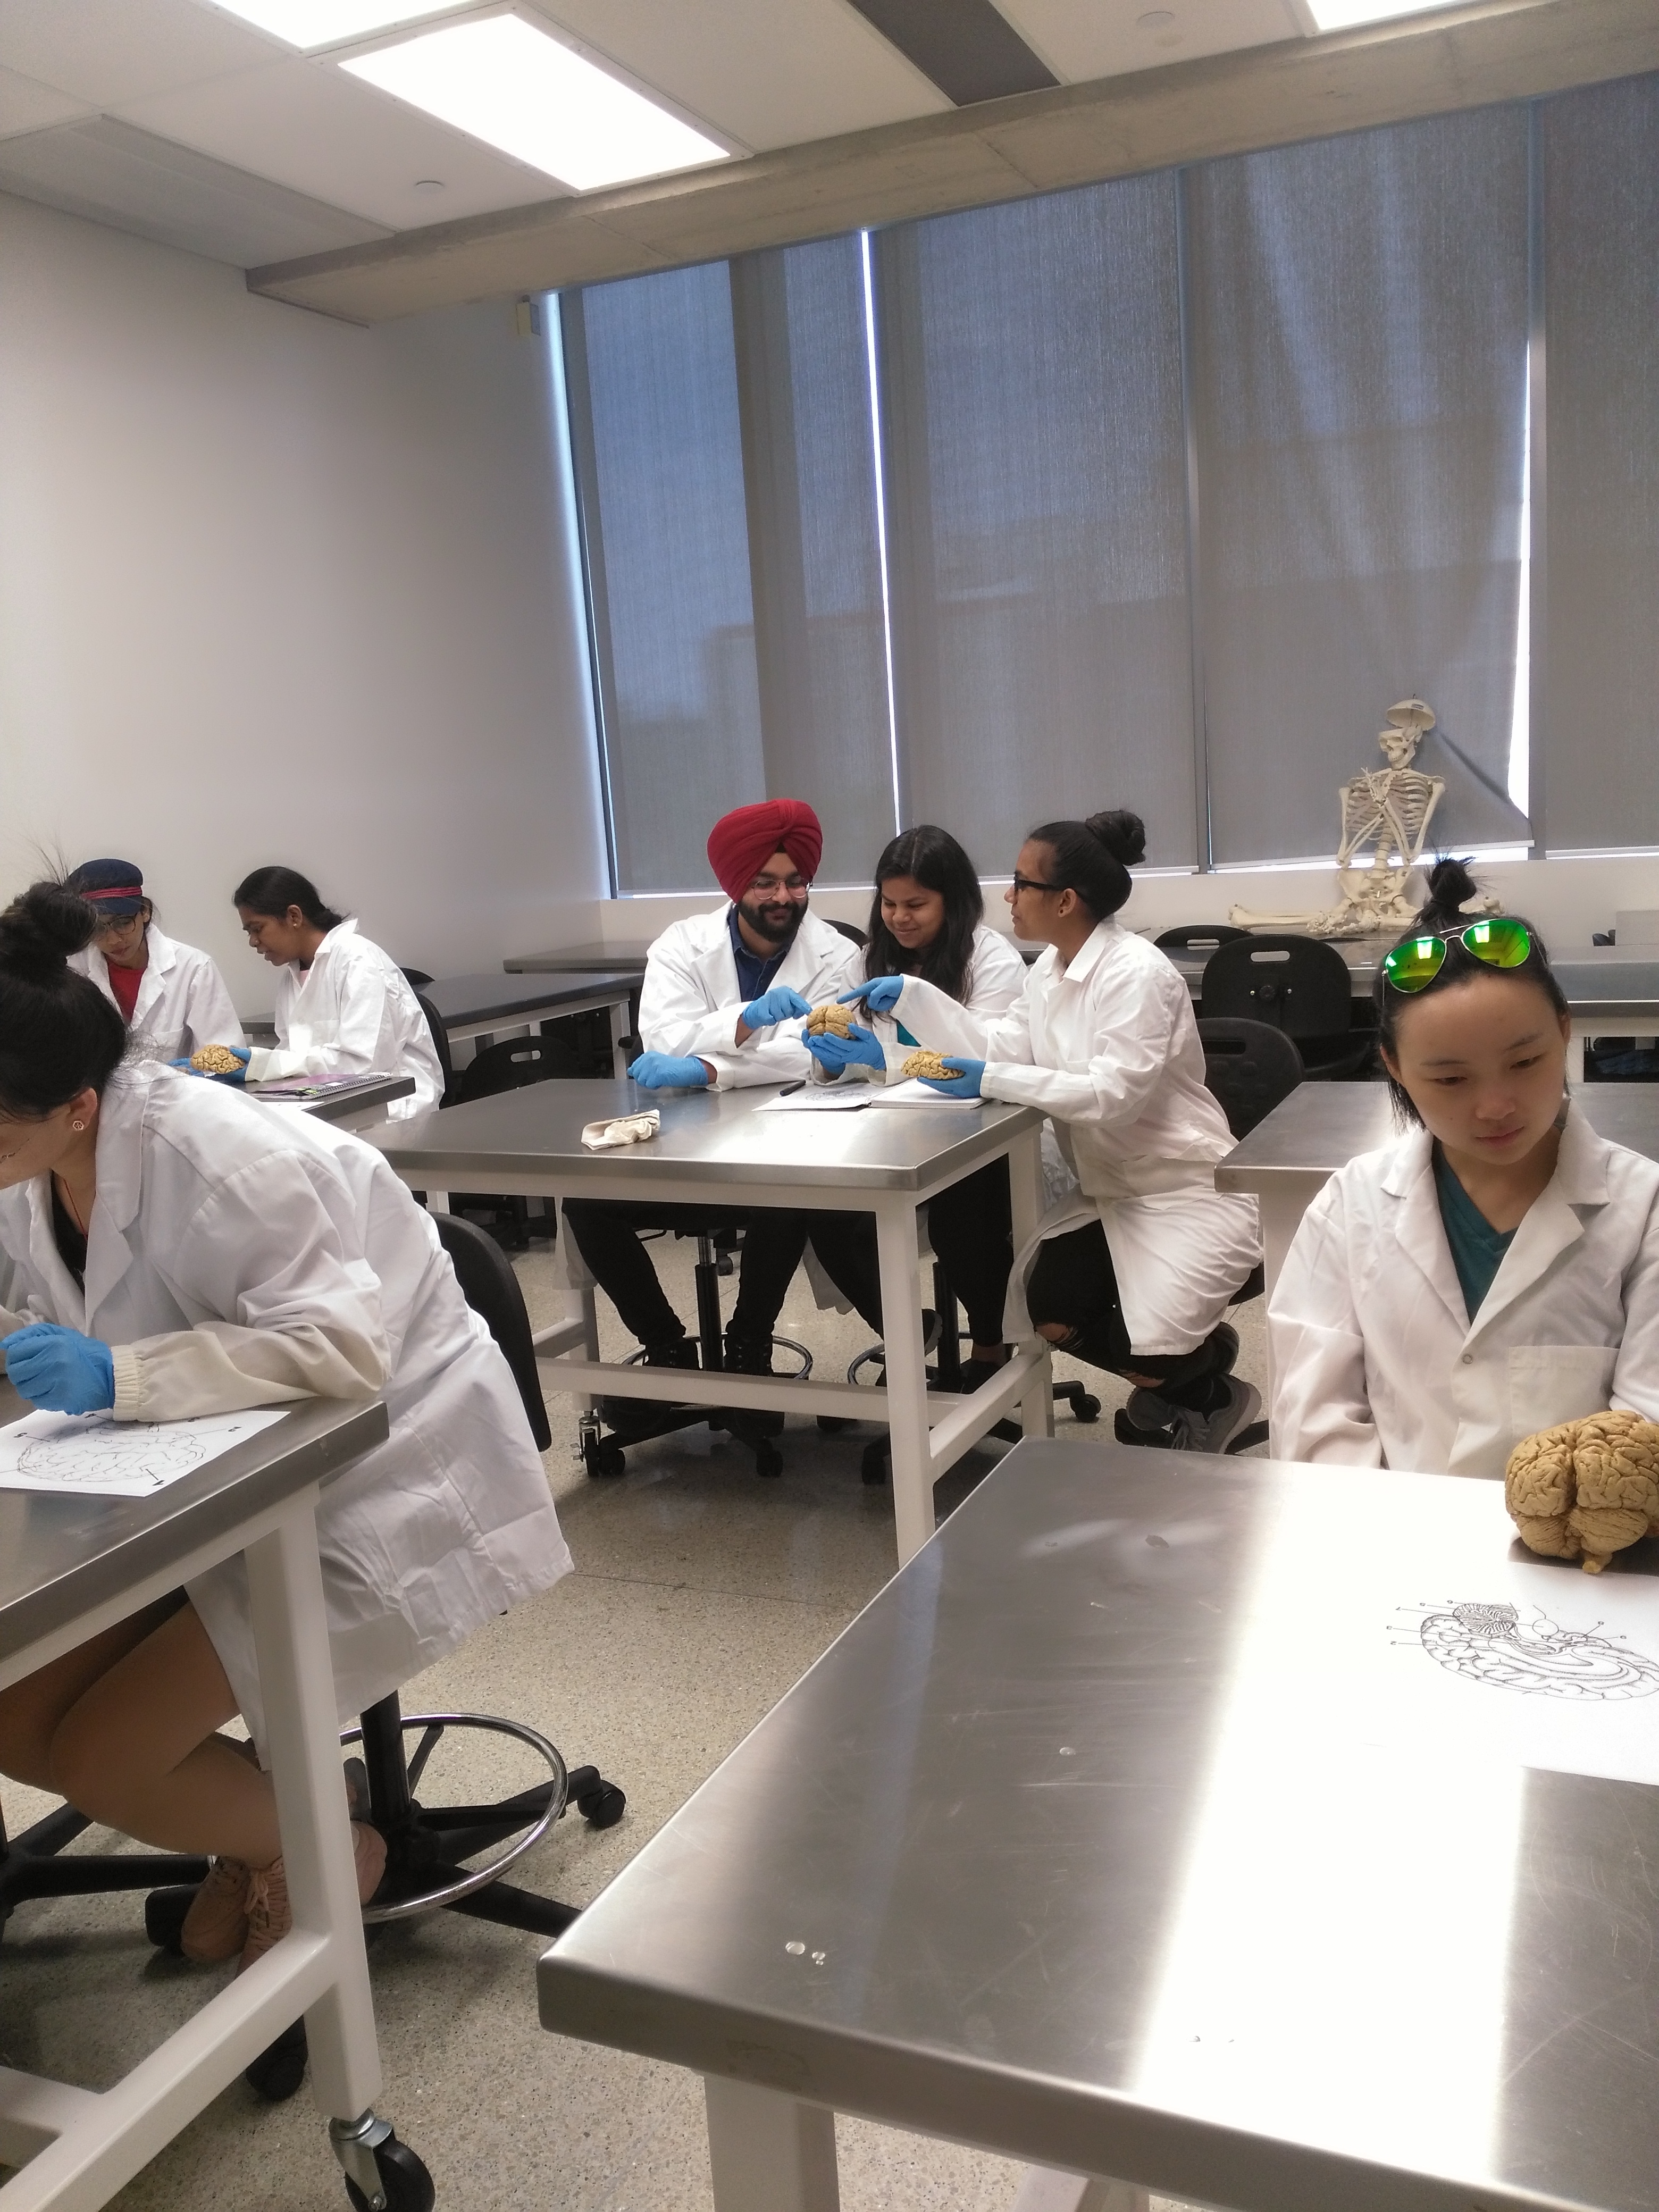 MMB students correlating parts of the brain with its functions at the Human Anatomy Lab of Schulich School of Medicine & Dentistry - Windsor Campus (June 27, 2019